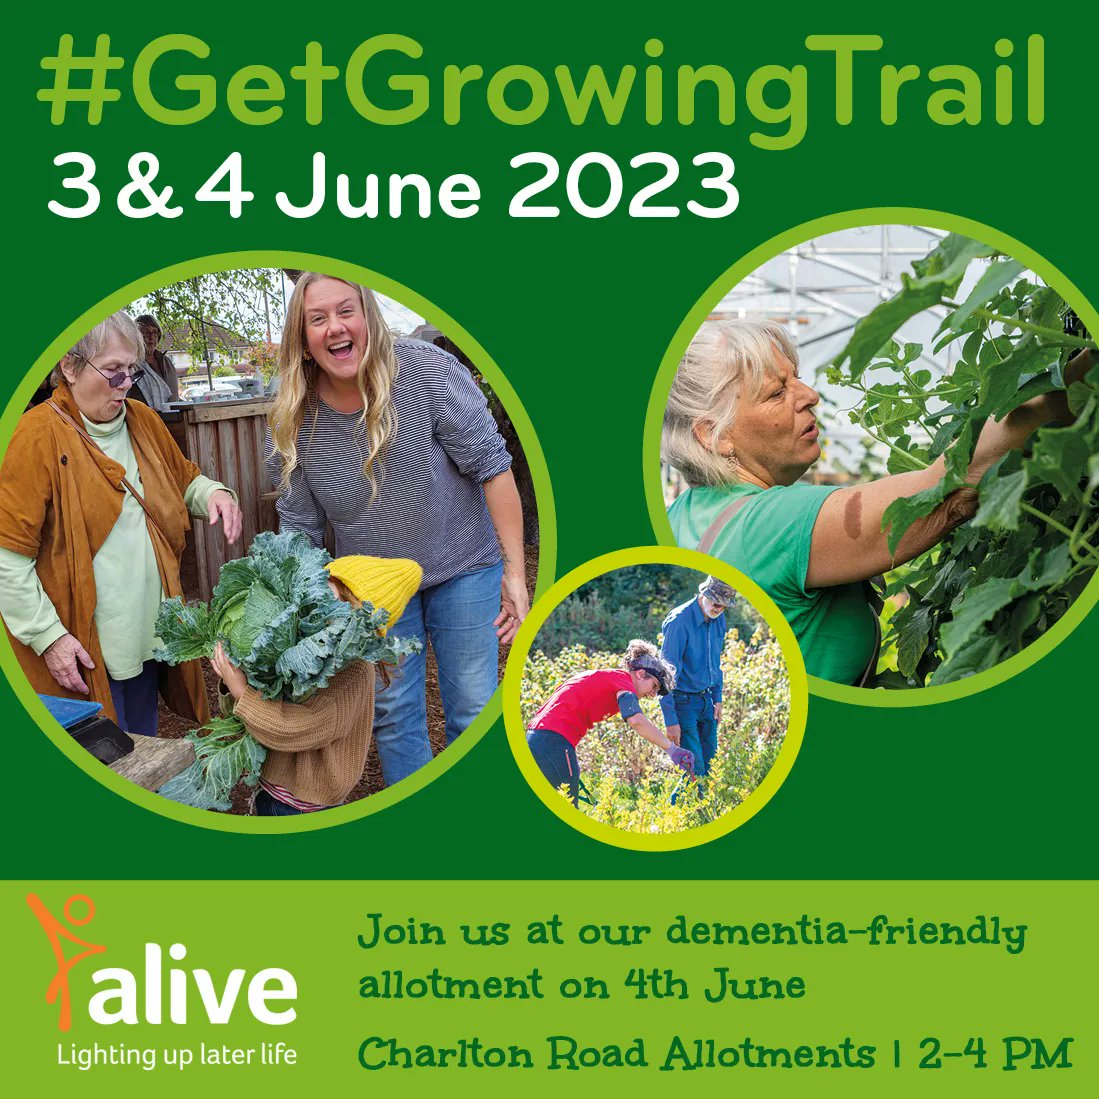 A quick reminder that, along with almost 30 other community growing sites across Bristol, we're opening our doors to the public THIS SUNDAY as part of the #GetGrowingTrail.

Come and join us, 2 -4 PM, at Charlton Road Allotments in Brentry.

buff.ly/3AFFLAf